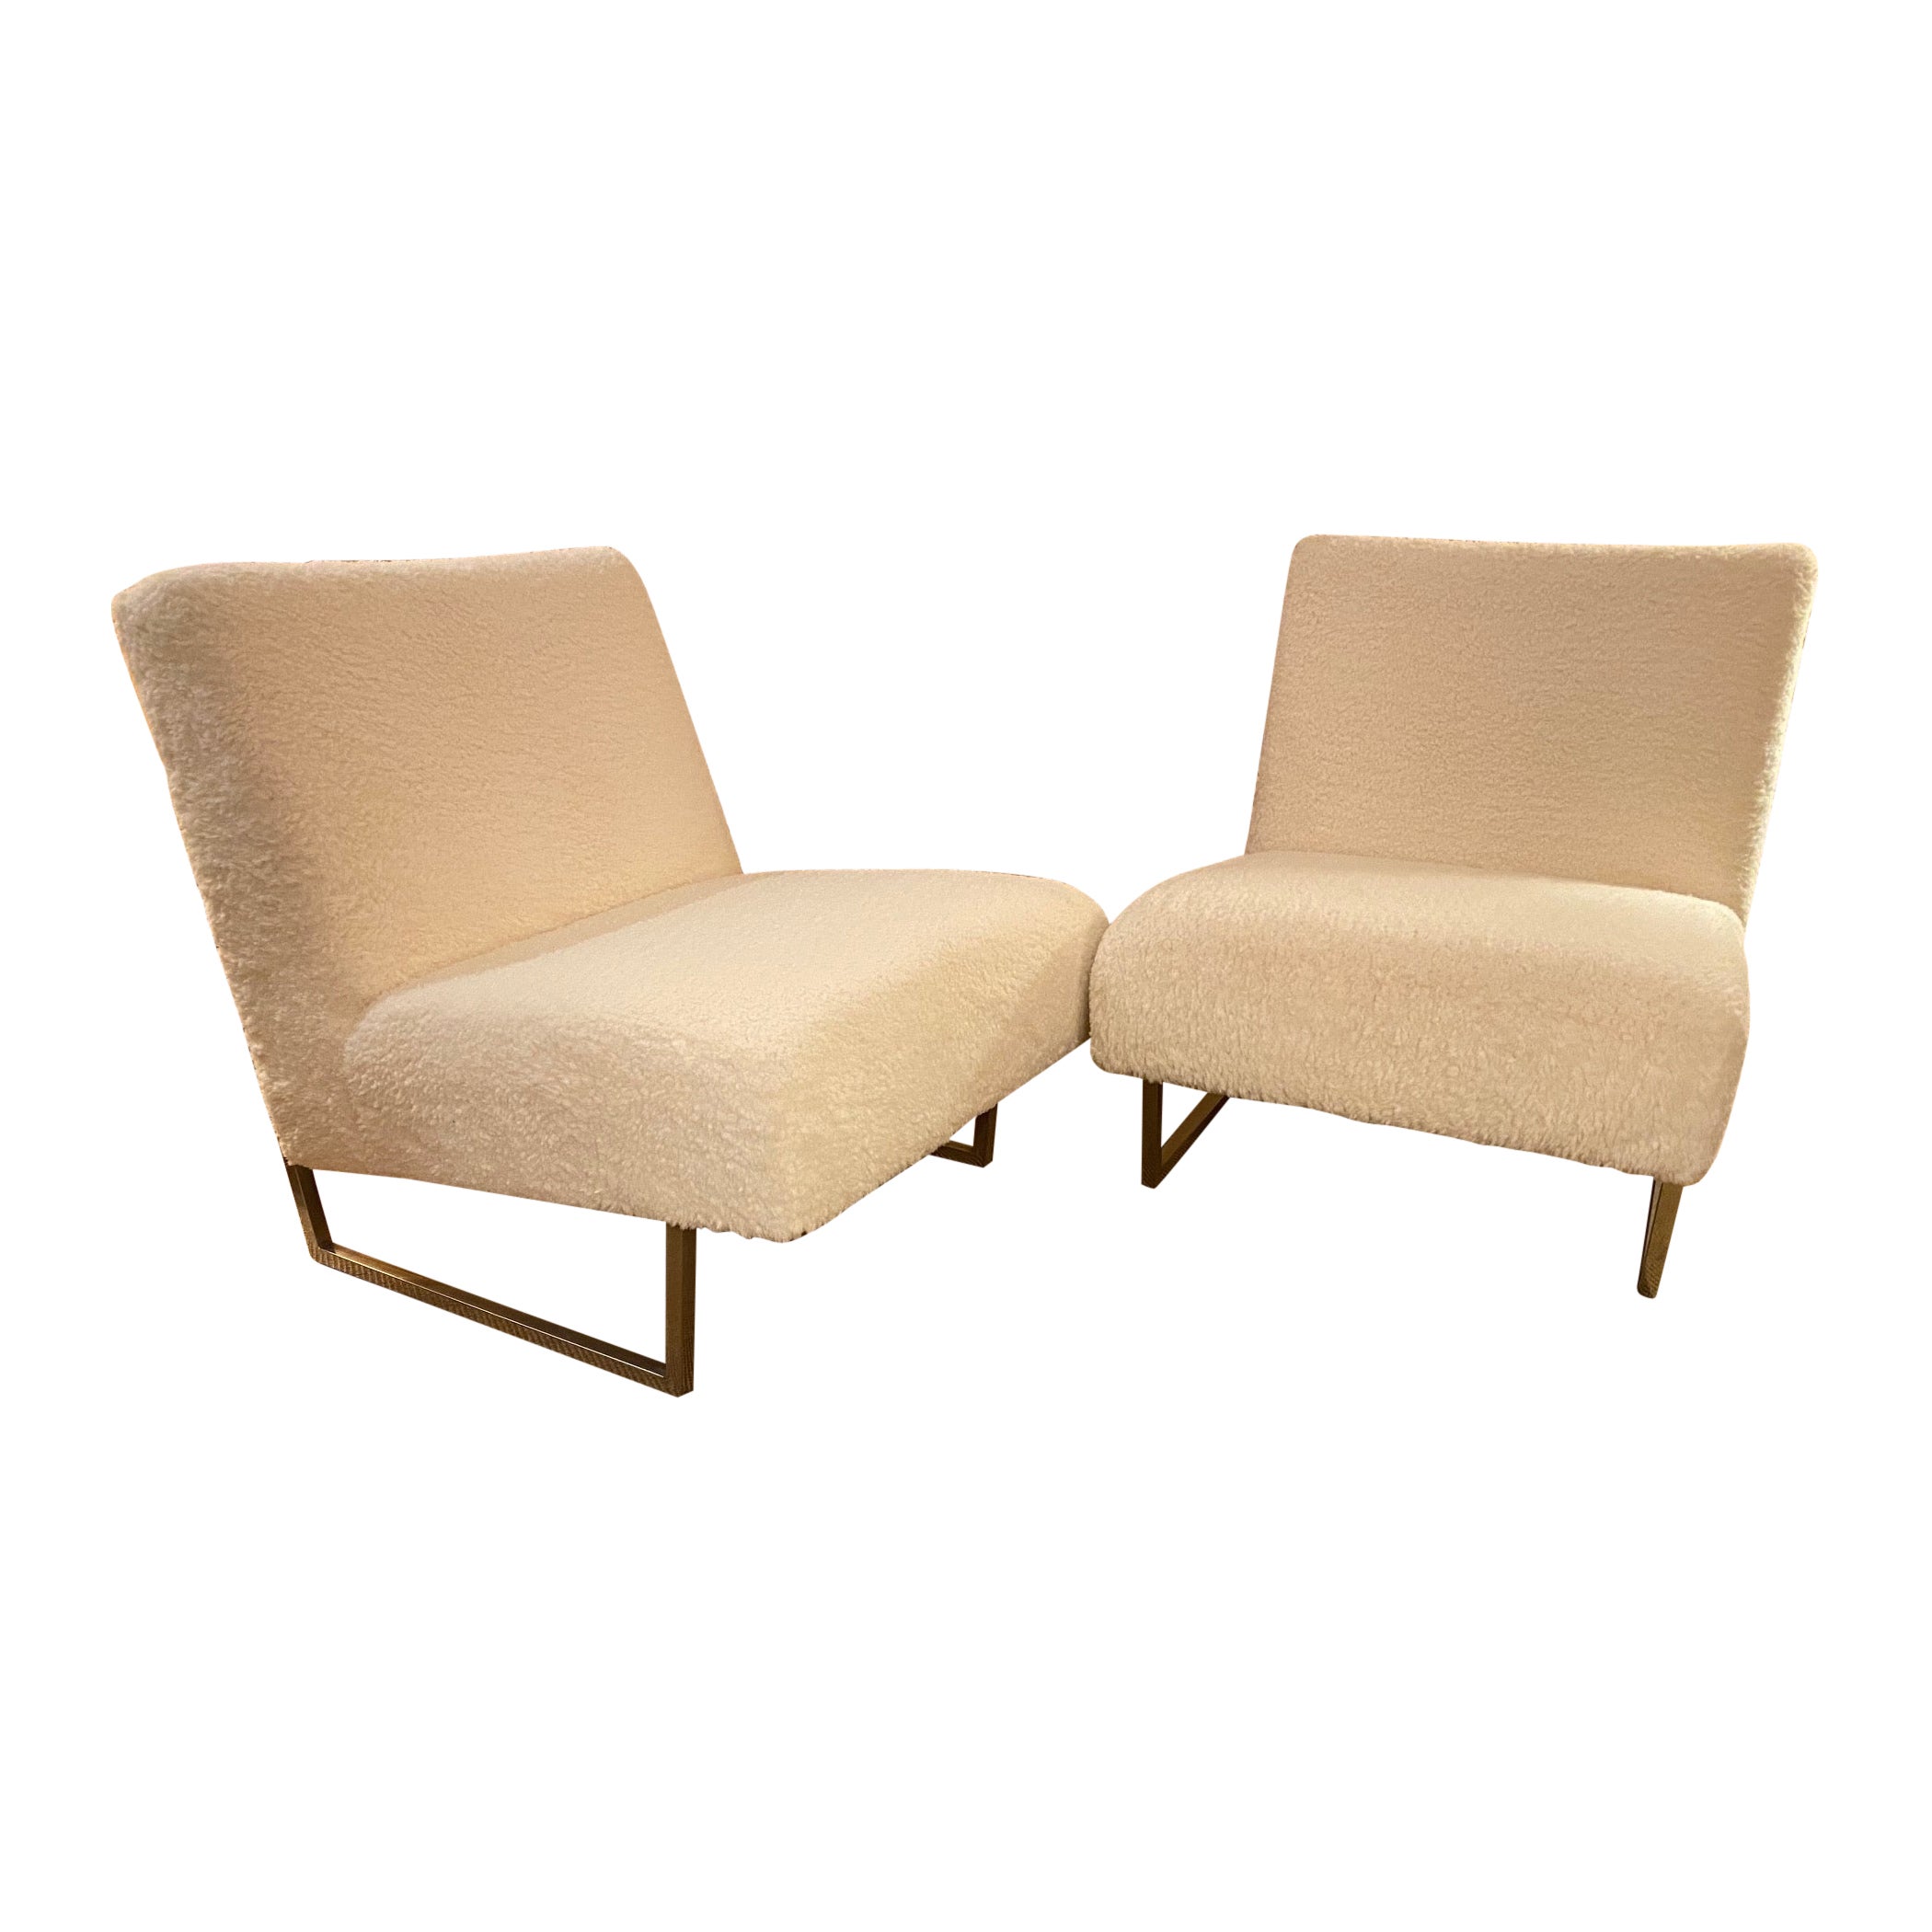 Pair of Slipper Chairs "Courchevel" by Pierre Guariche, France, 1959 For Sale